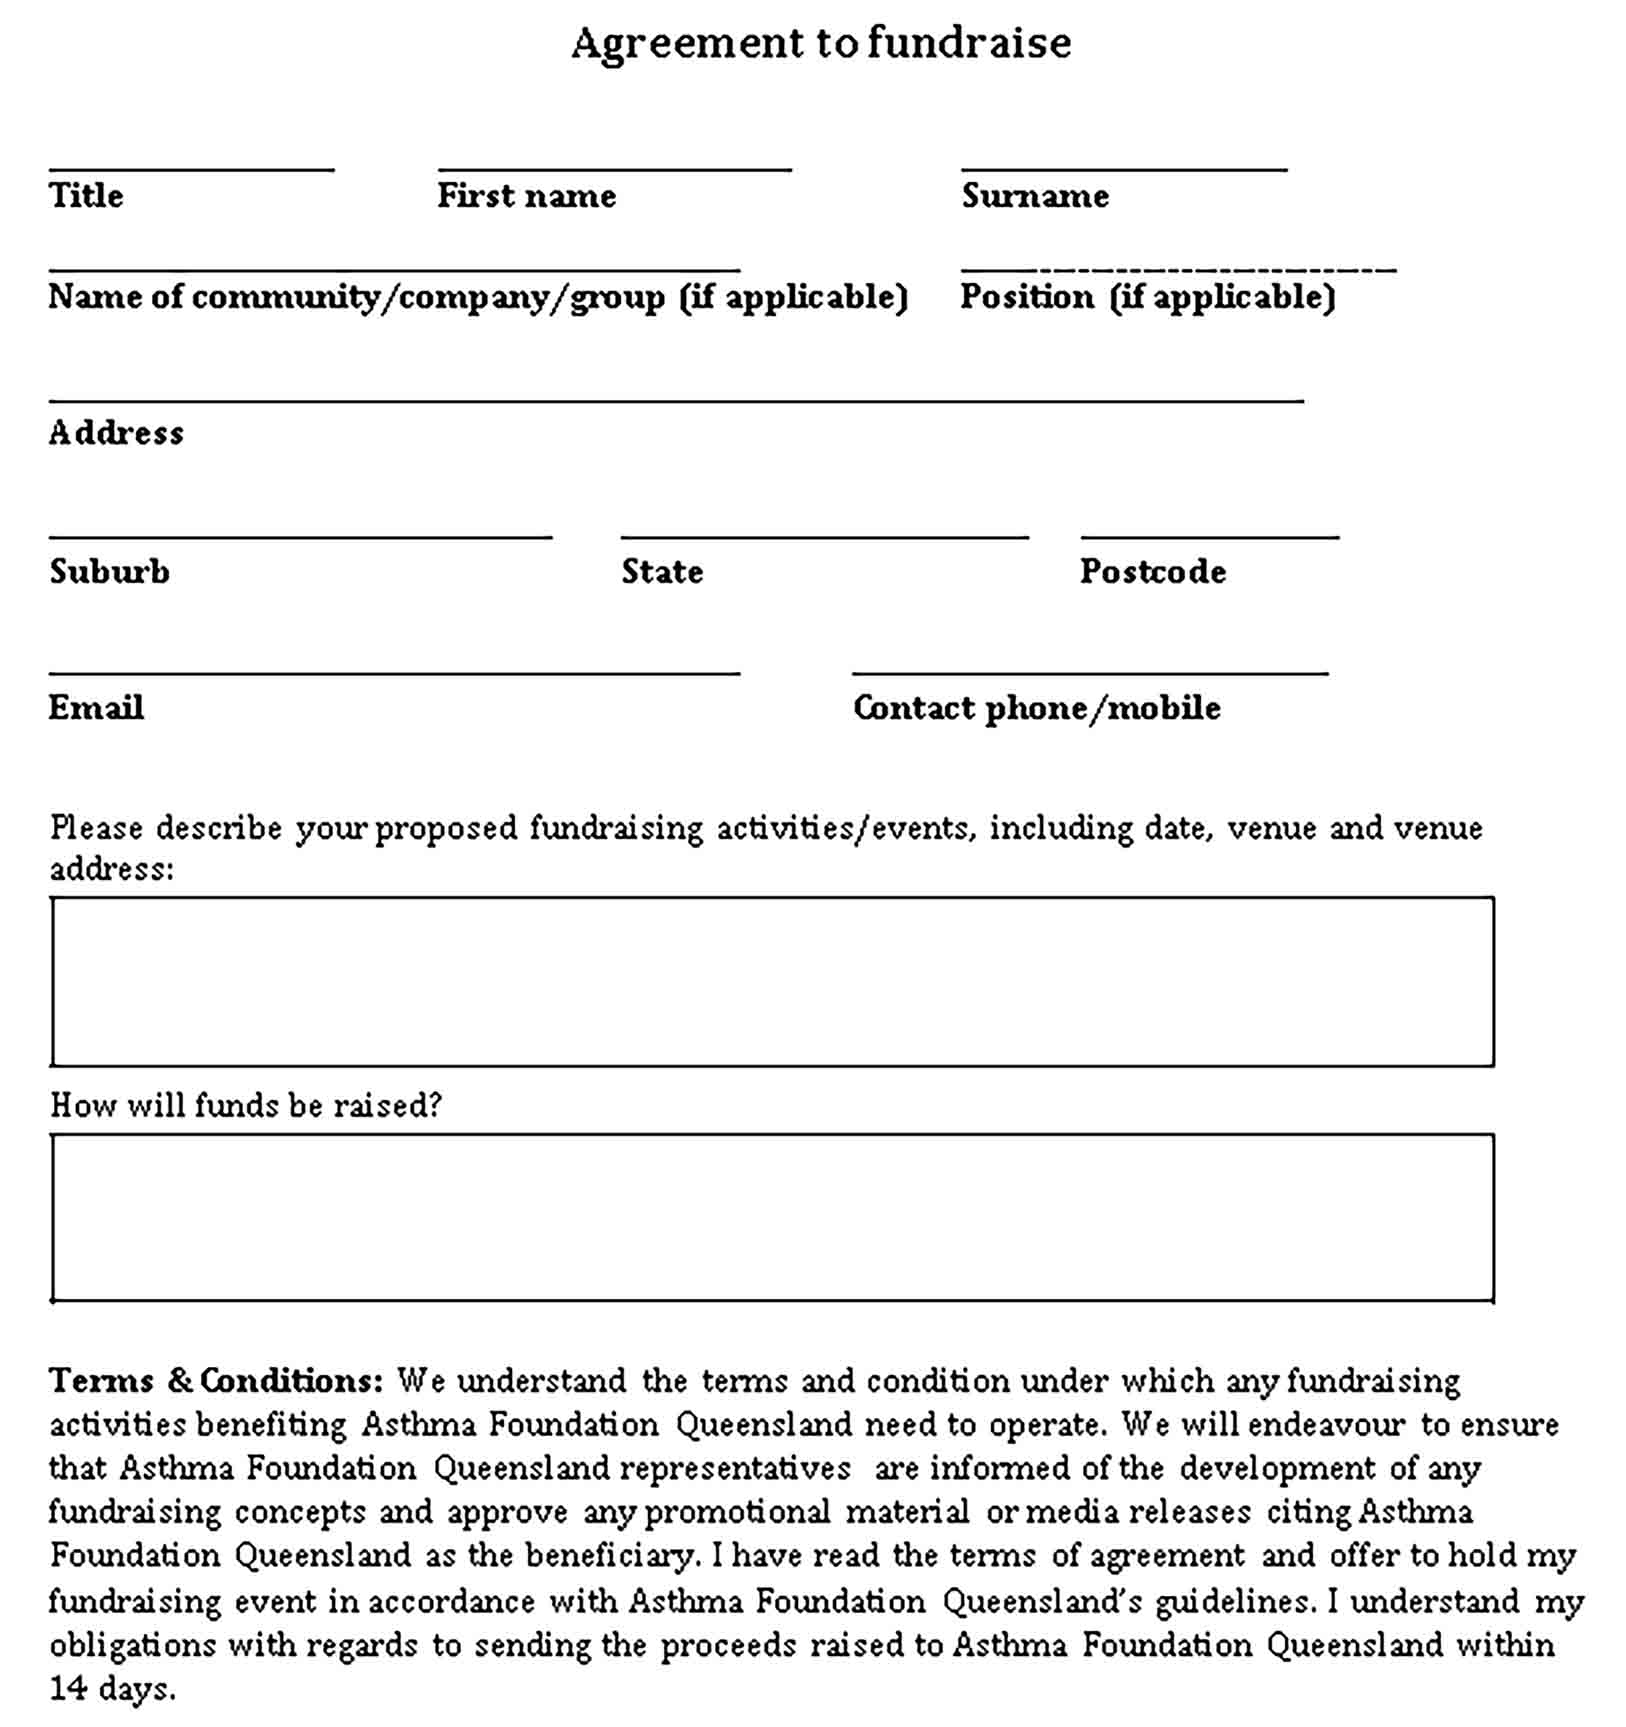 Templates Printable Agreement to fundraise Sample